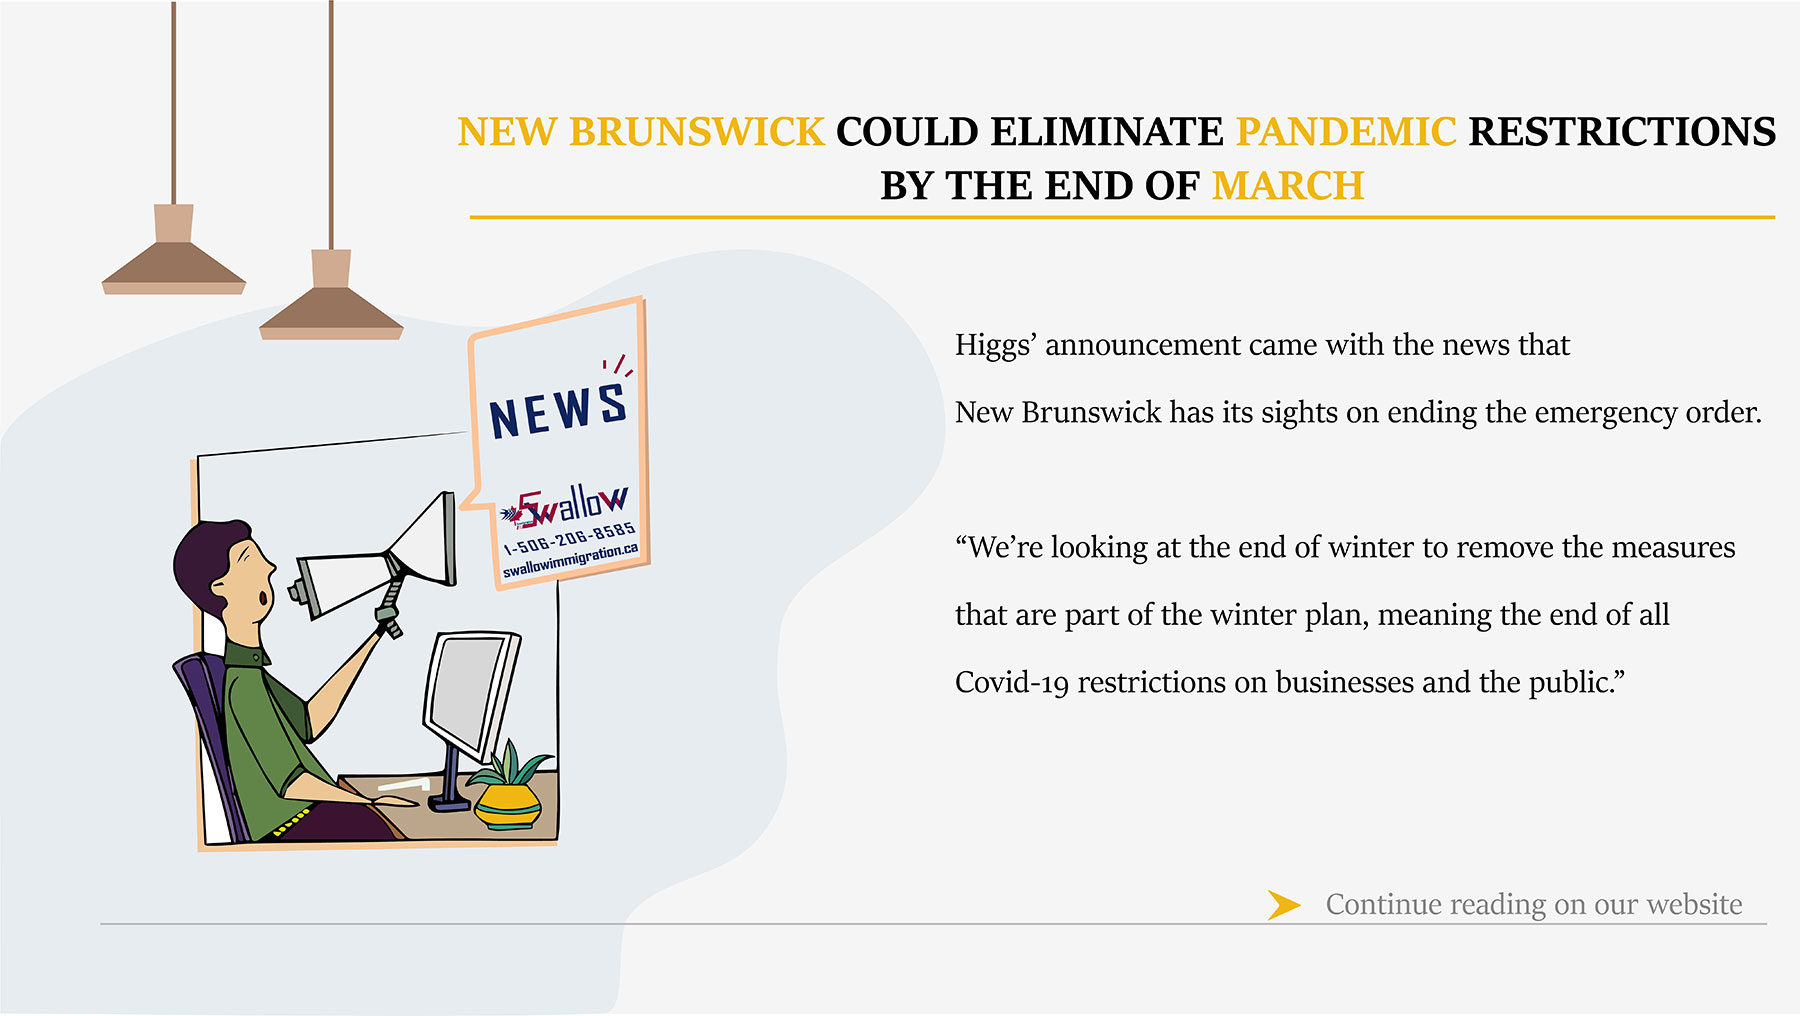 NEW BRUNSWICK COULD ELIMINATE PANDEMIC RESTRICTIONS BY THE END OF MARCH.